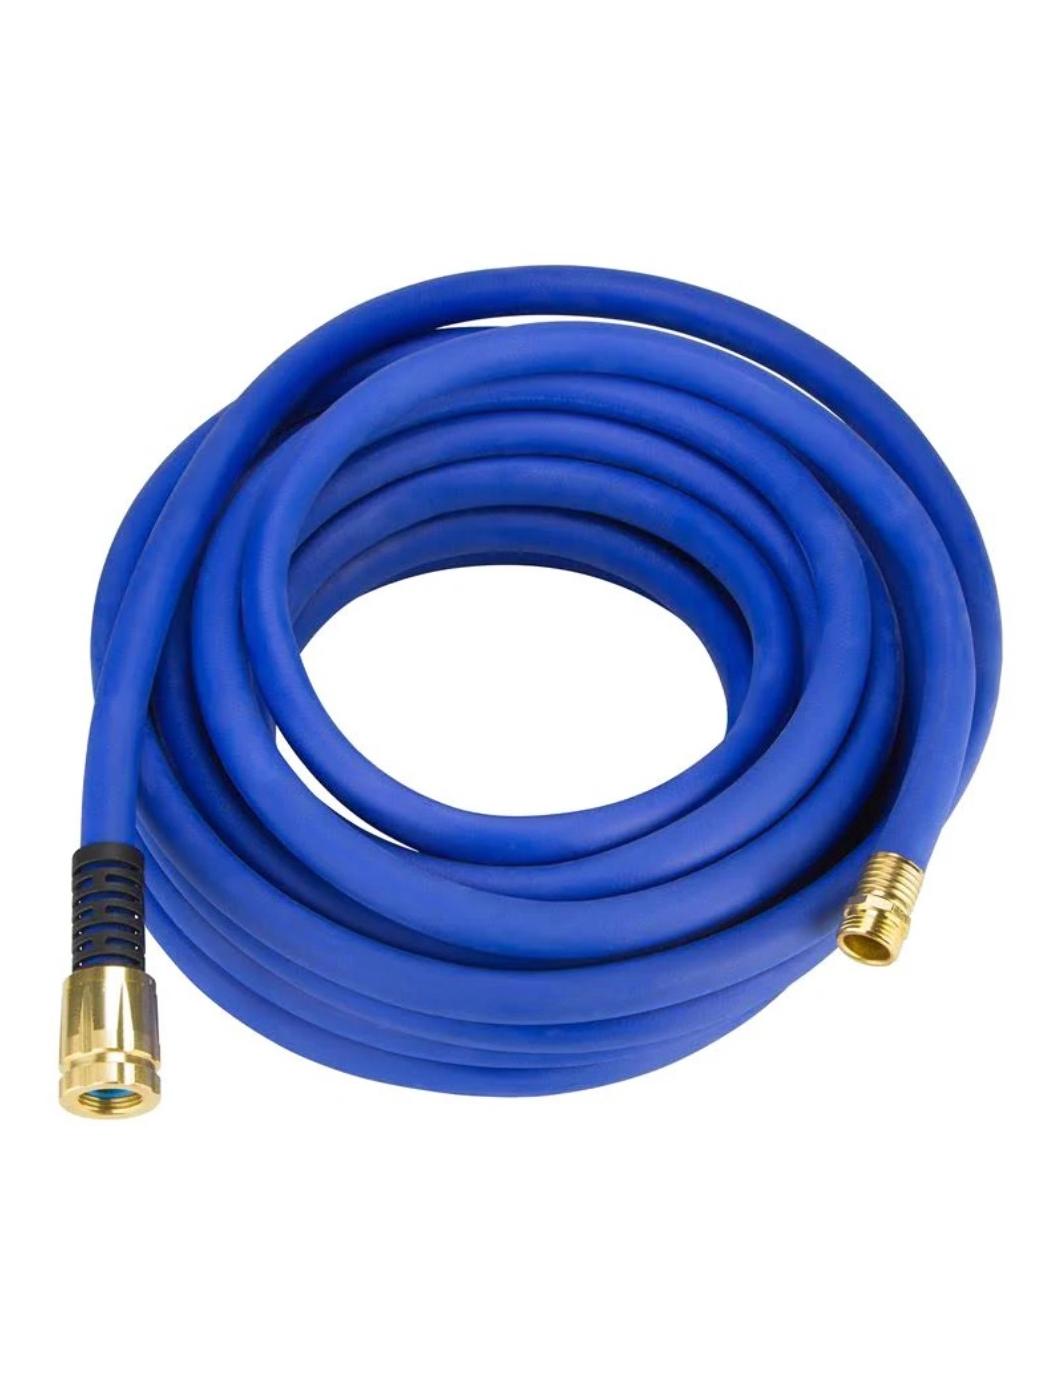 Swan Element CoolTOUCH Garden Hose; image 2 of 2